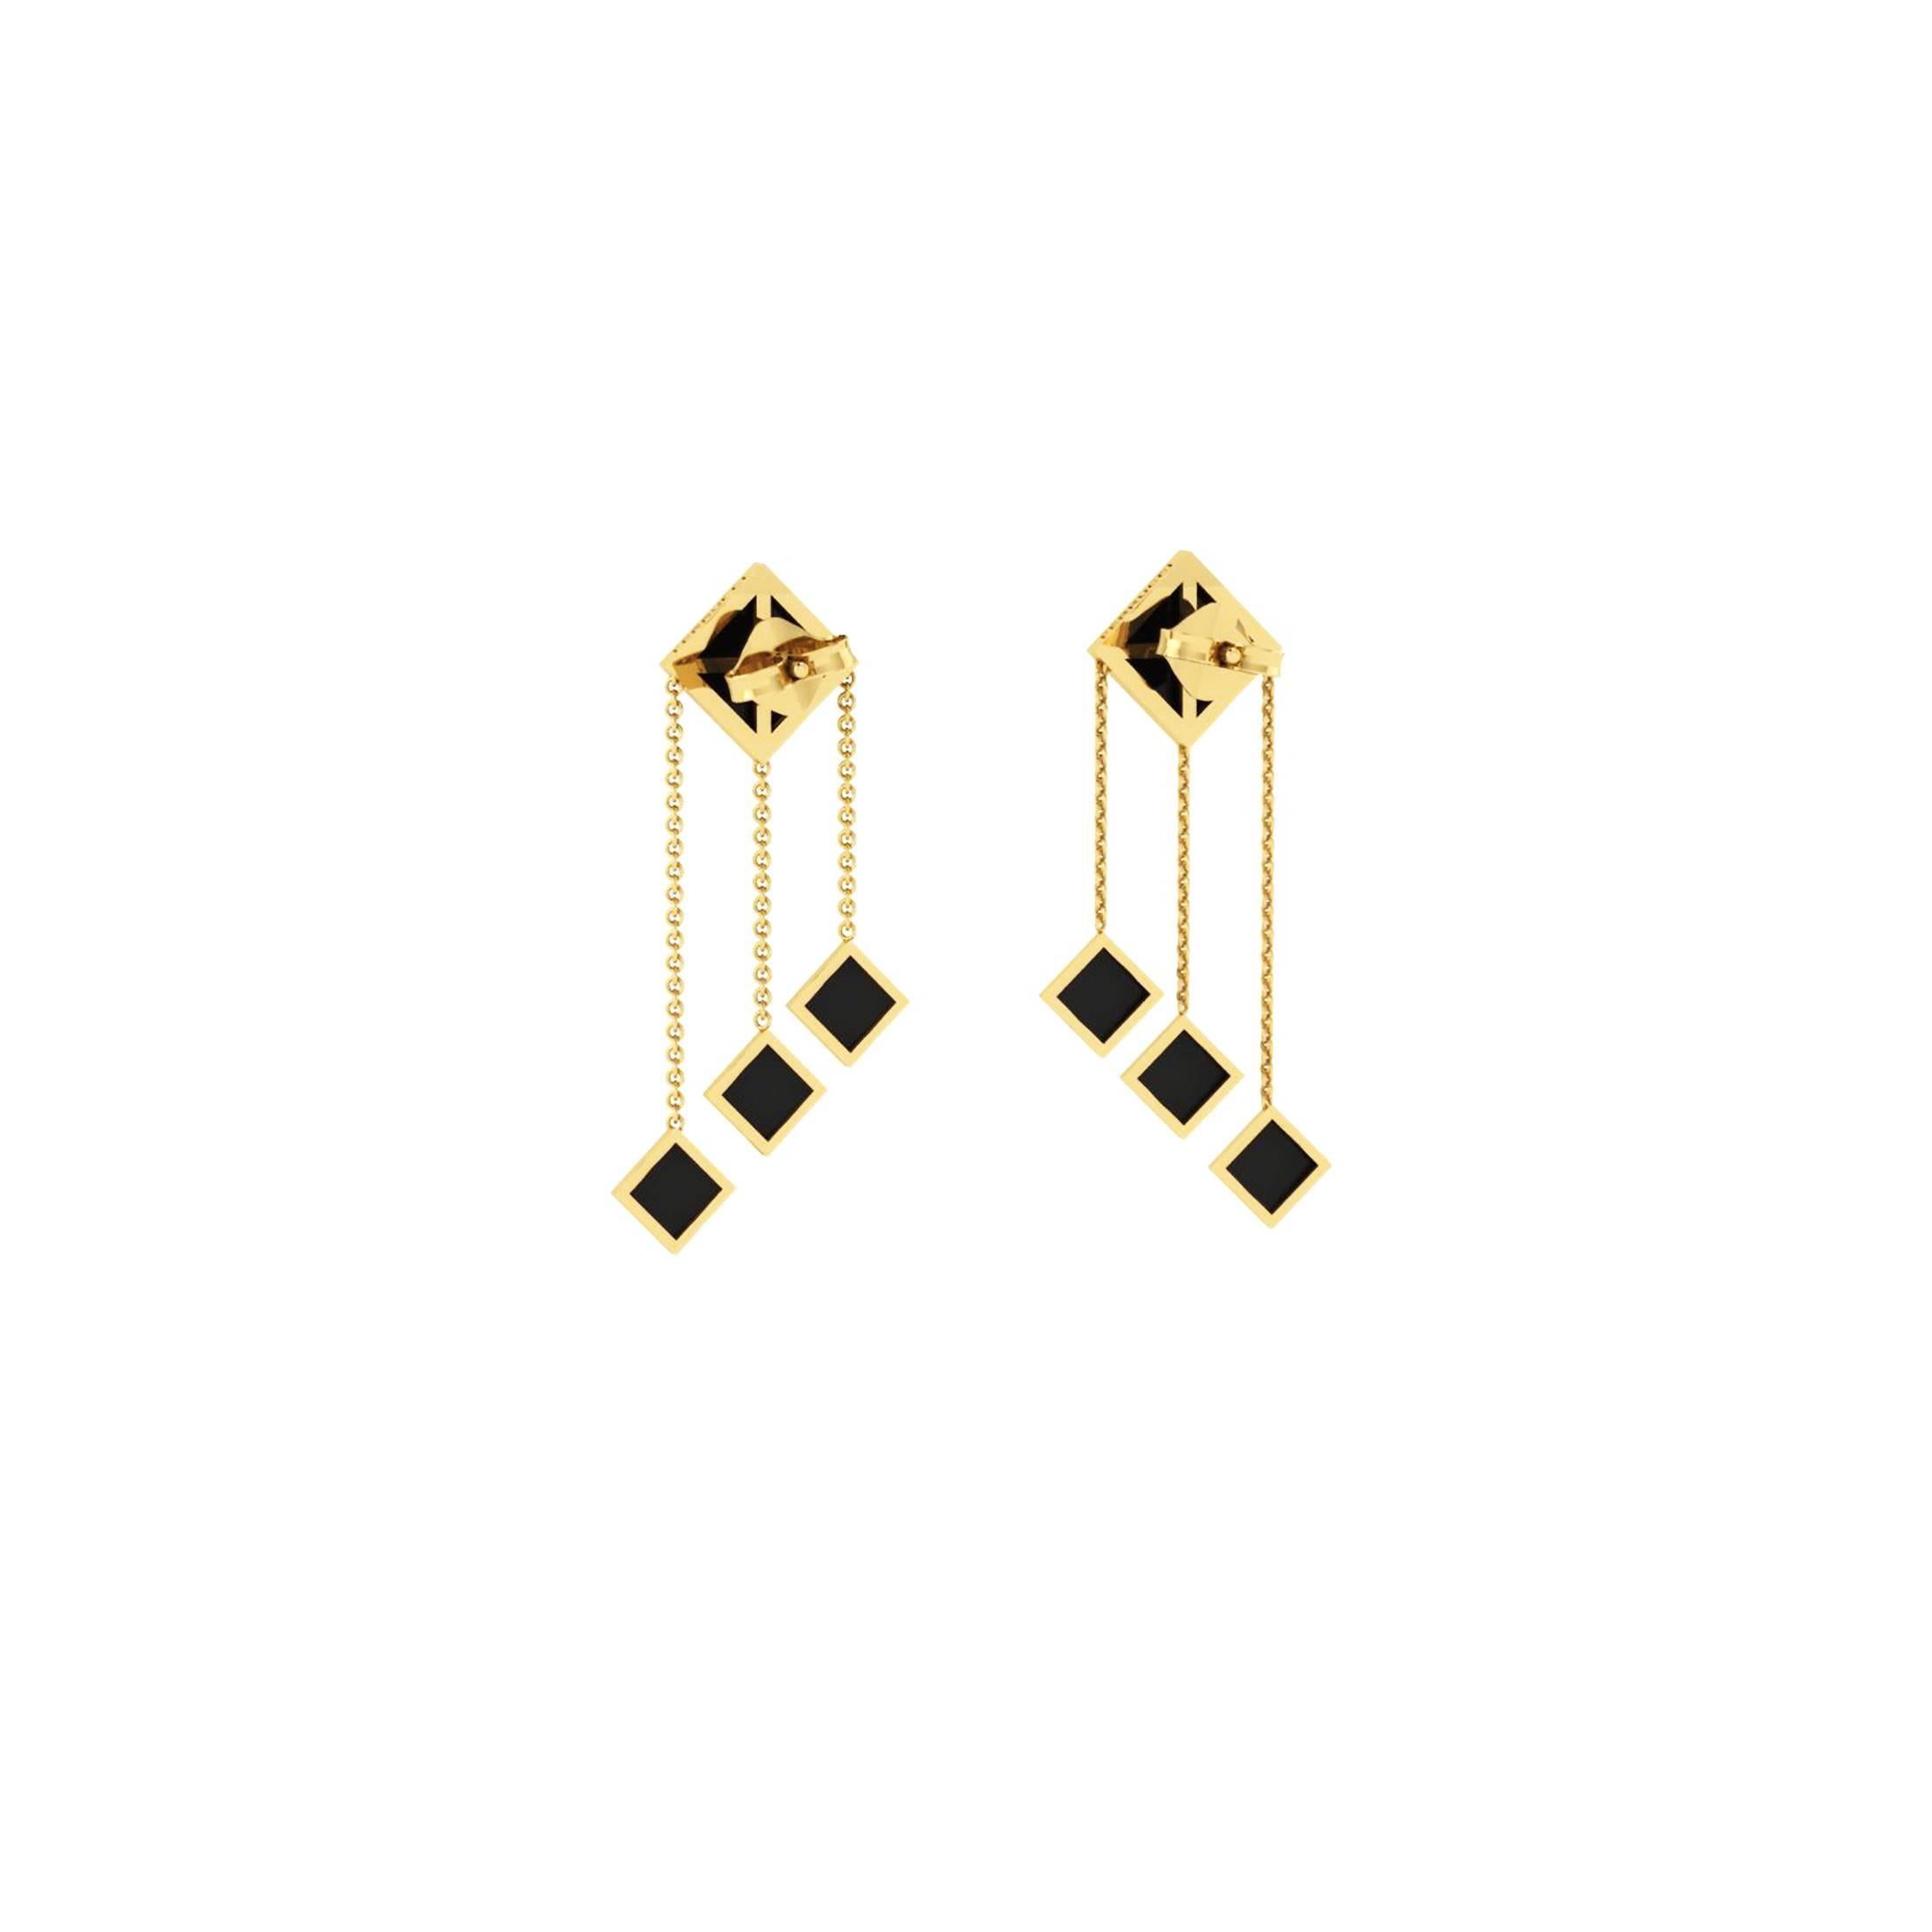 Ferrucci Black Onyx Pyramids Dangling 18 Karat Yellow Gold Chandelier Earrings In New Condition For Sale In New York, NY